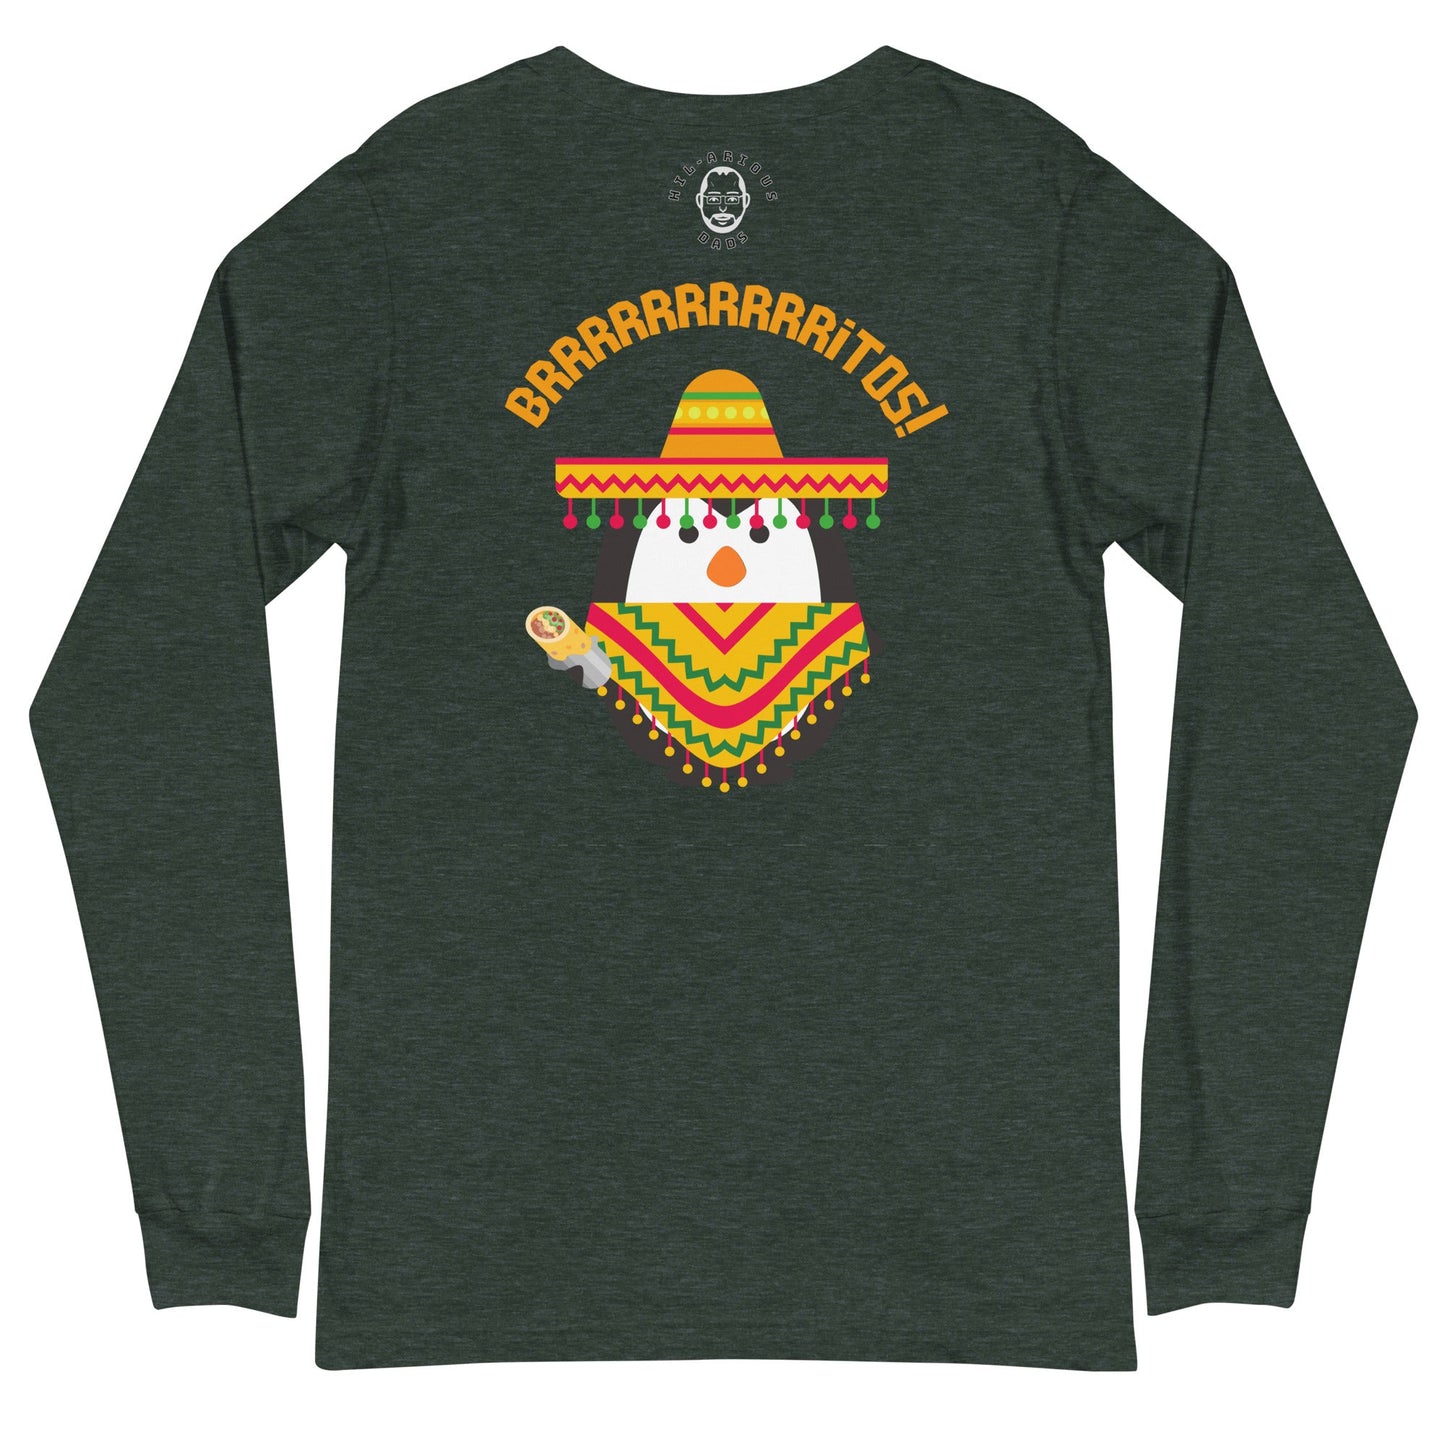 What do penguins like to eat during Cinco De Mayo?-Long Sleeve Tee - Hil-arious Dads